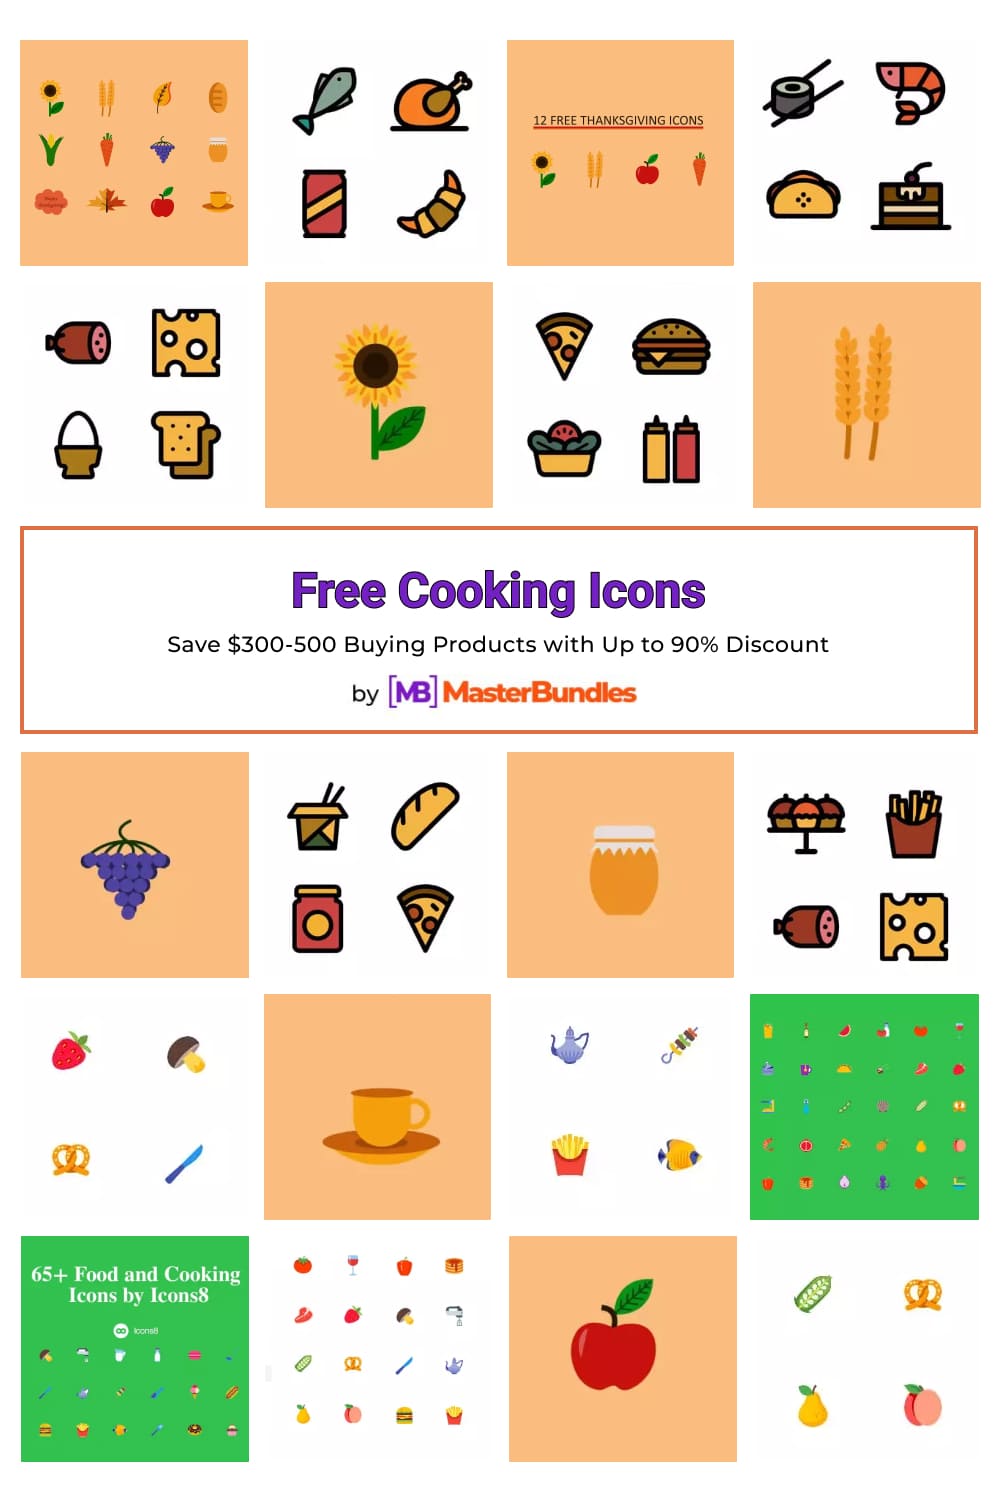 Free Cooking Icons Pinterest image.